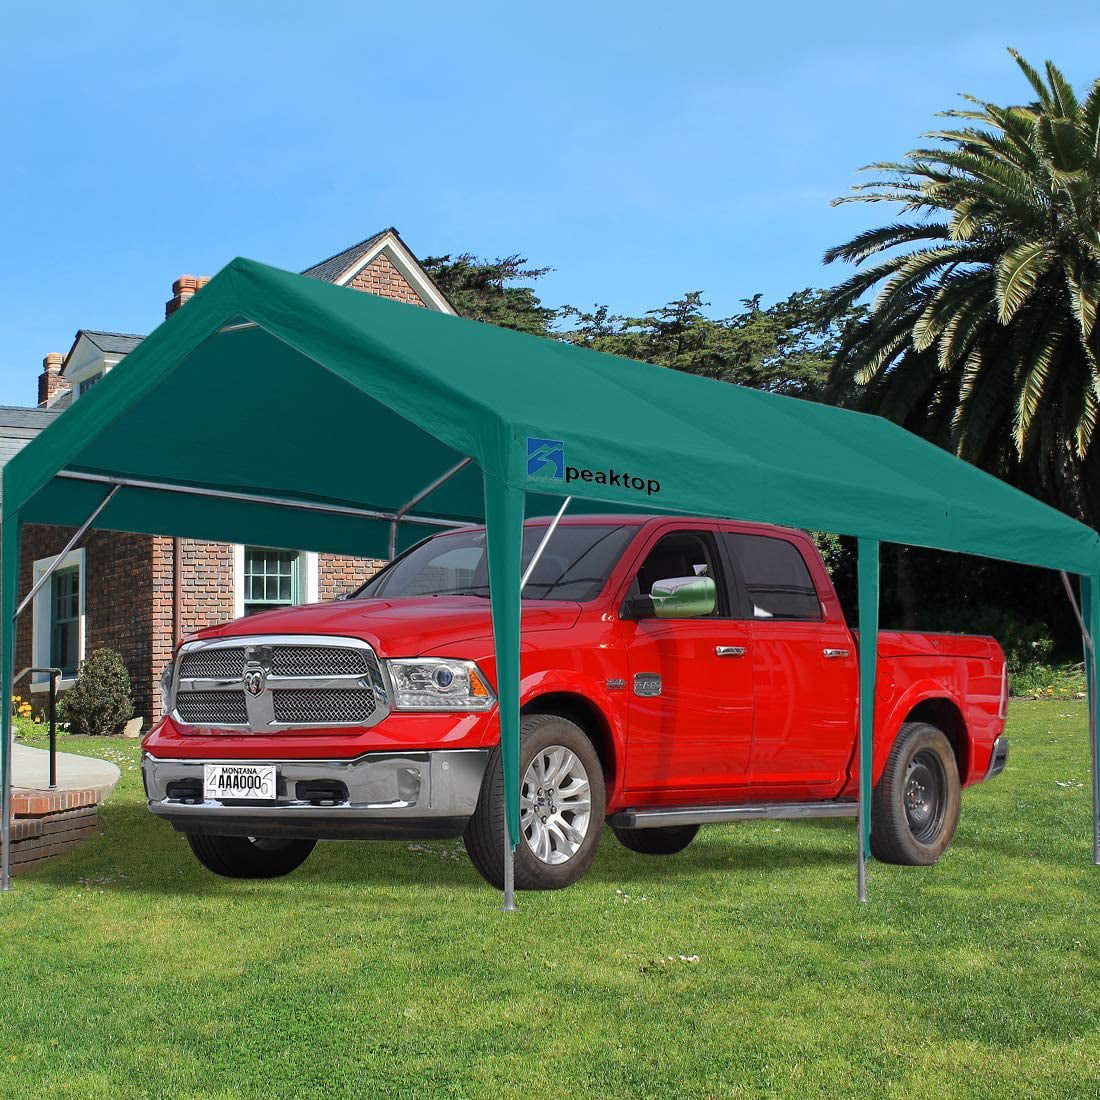 PEAKTOP OUTDOOR 12 x 20ft Upgraded Heavy Duty Carport,Portable Car Canopy,Garage Tent,Boat Shelter with Reinforced Triangular Beams and 4 Weight Bags,with Ground Bar 